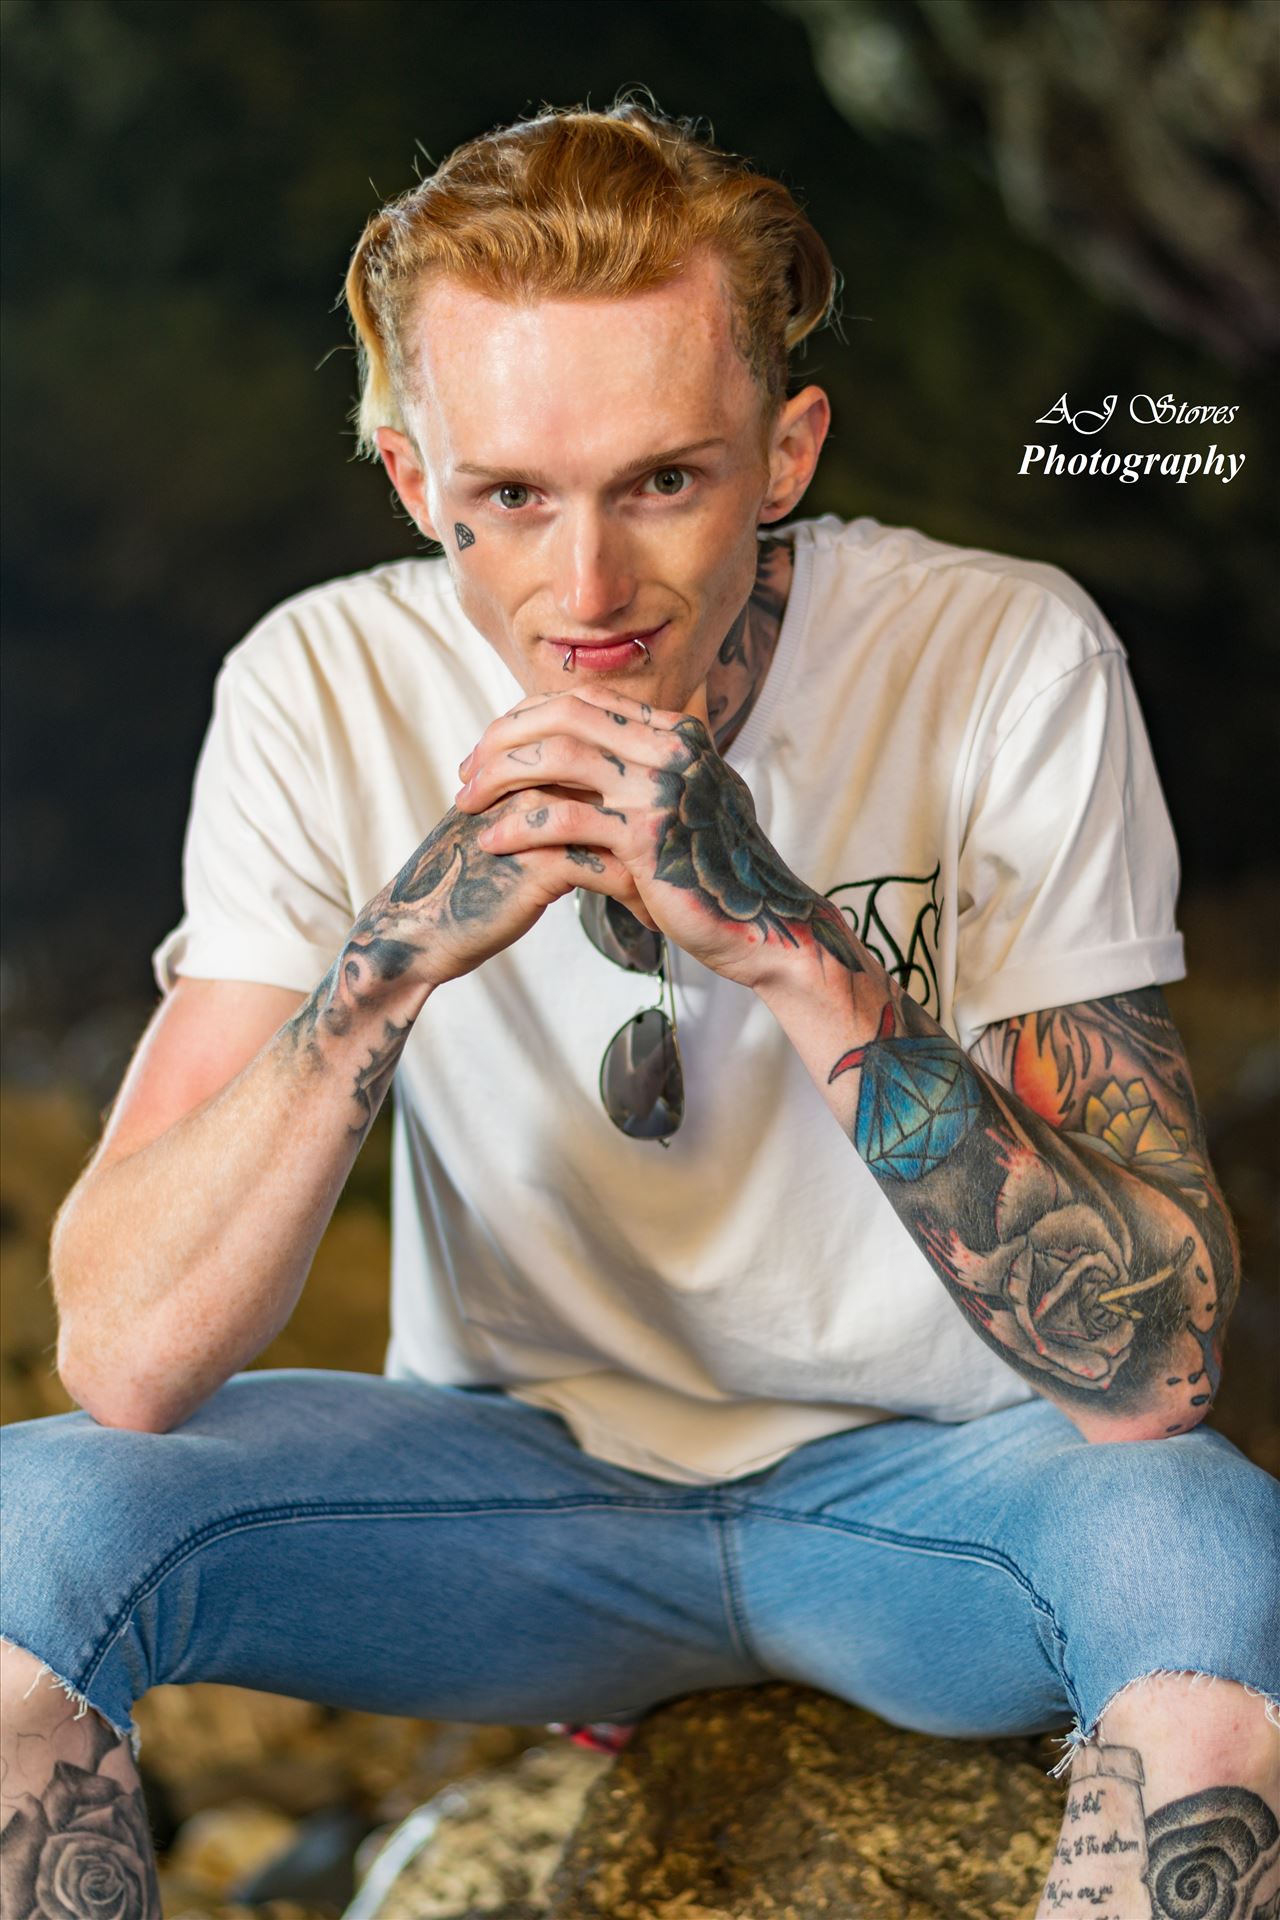 Luke Proctor 07 Great shoot with Luke down Seaham Beach by AJ Stoves Photography